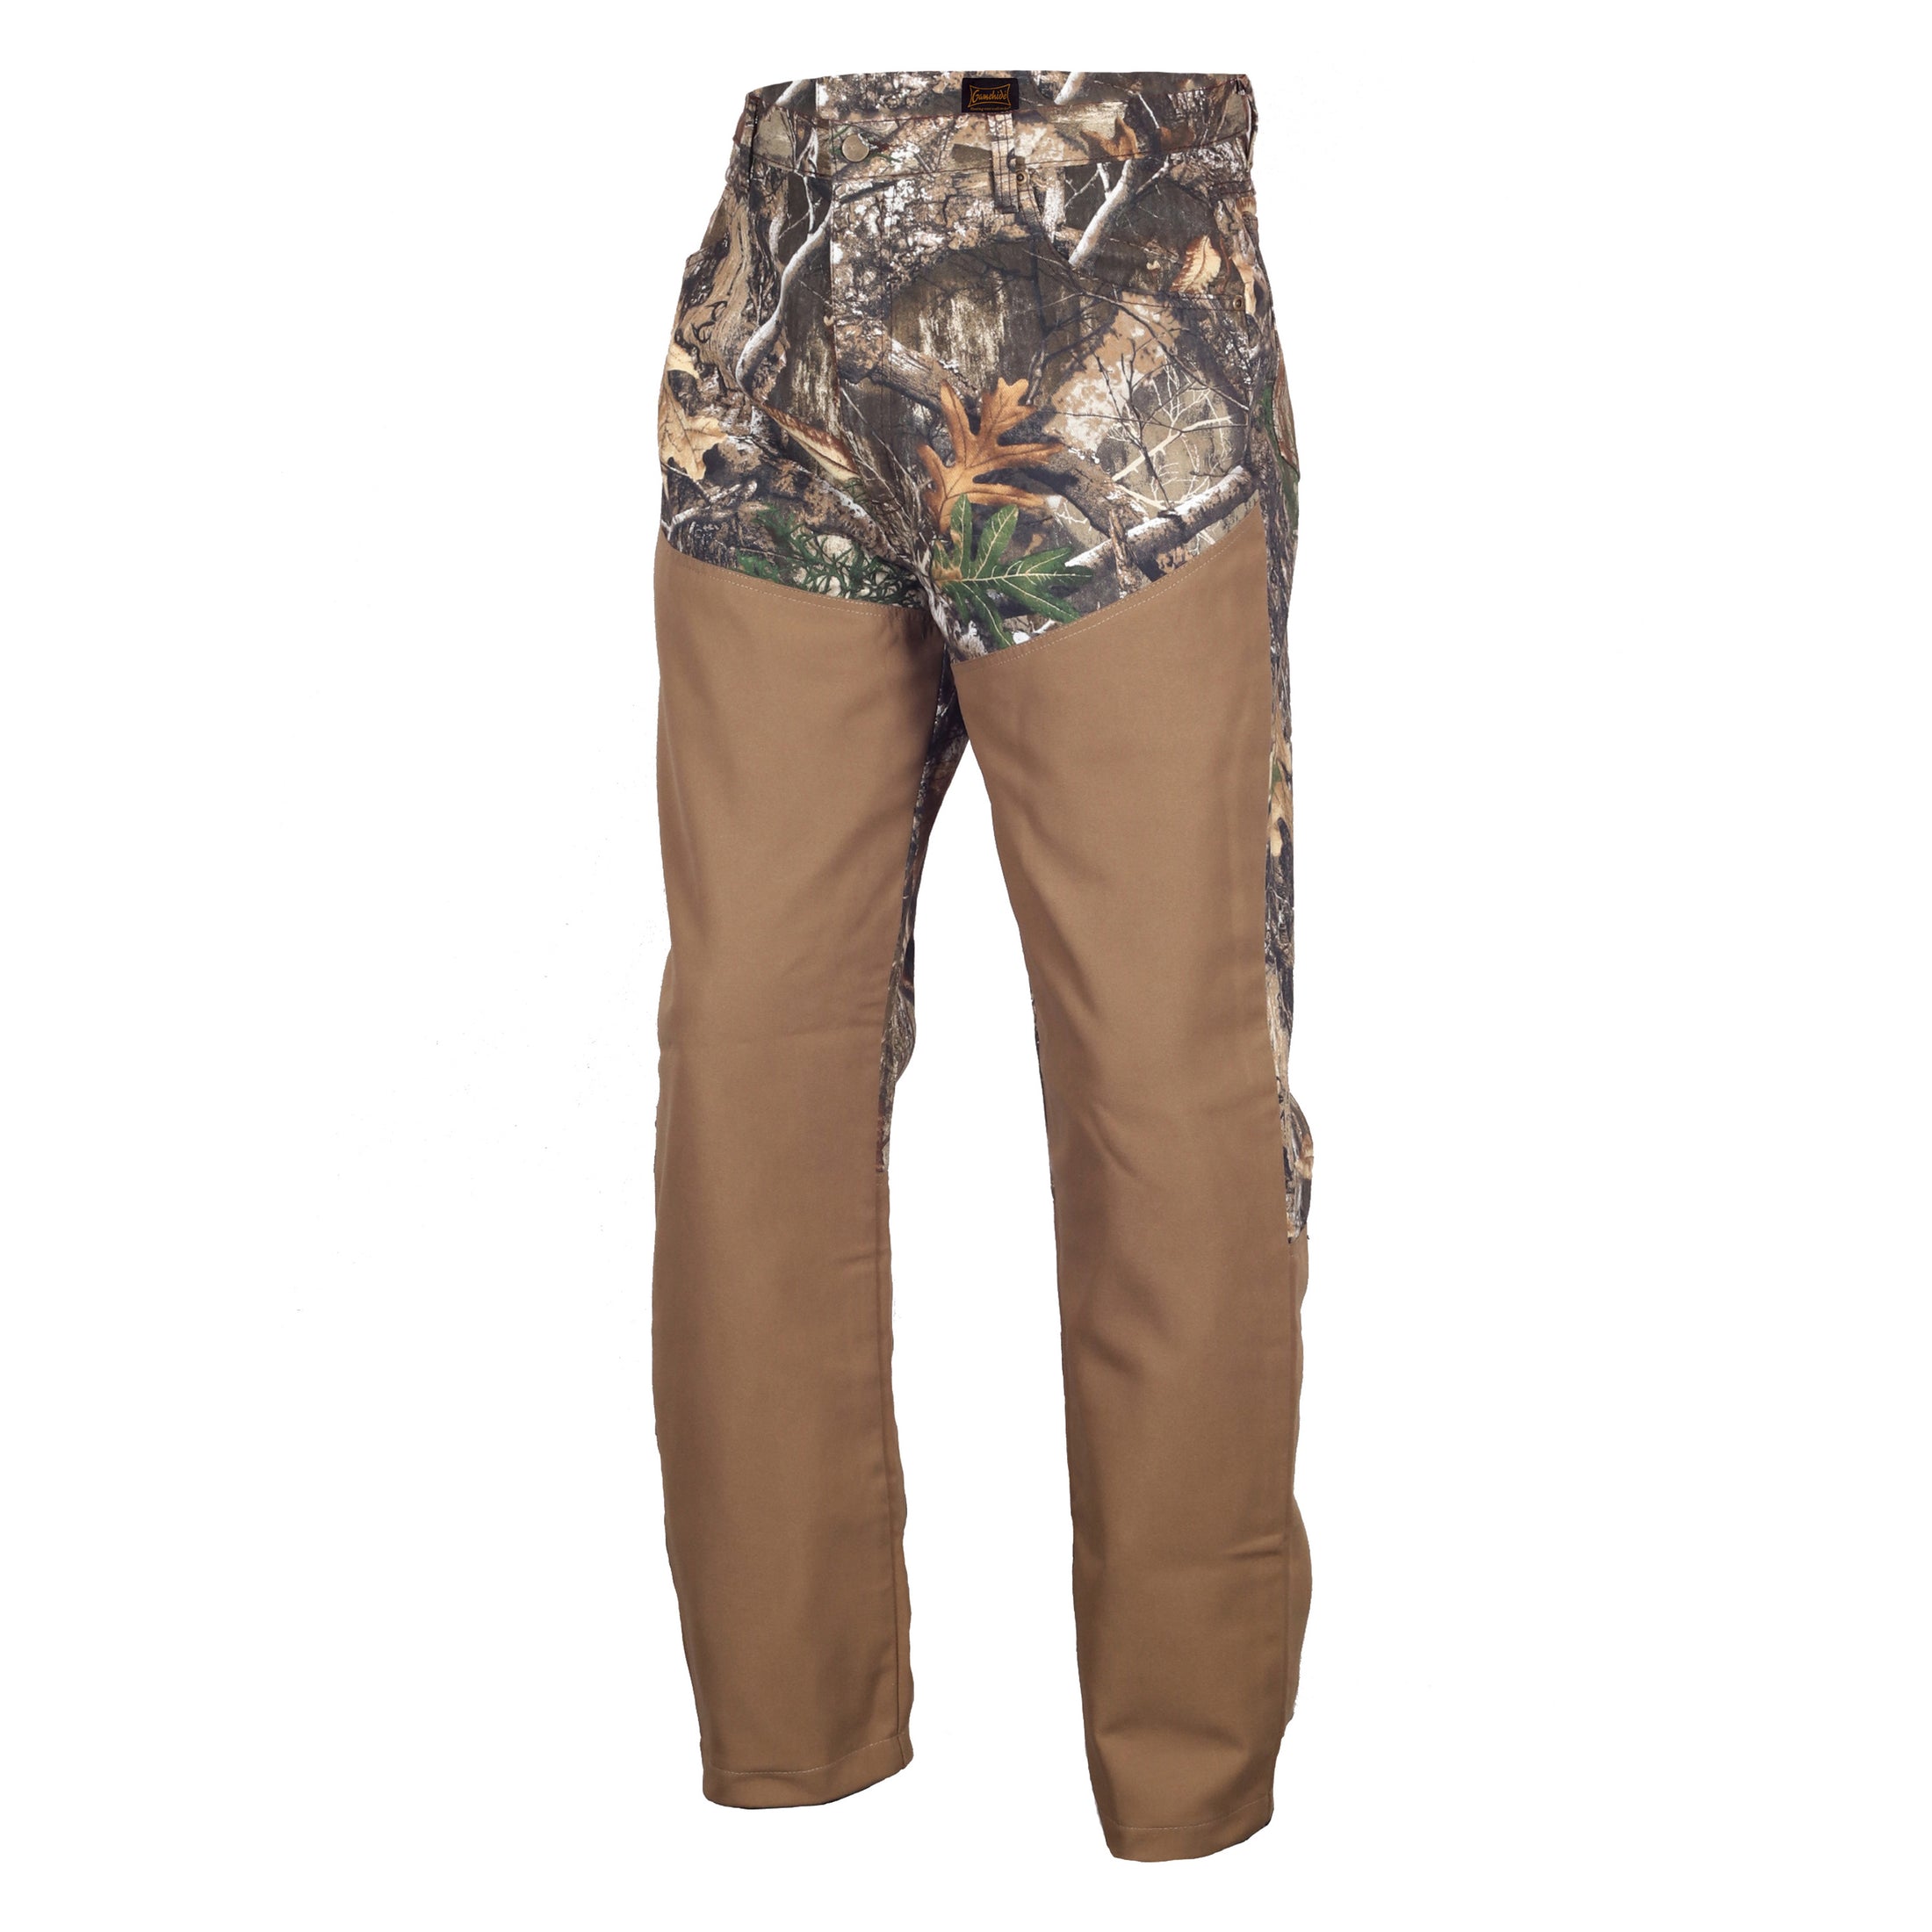 gamehide woodsman upland hunting jeans front view (realtree edge)